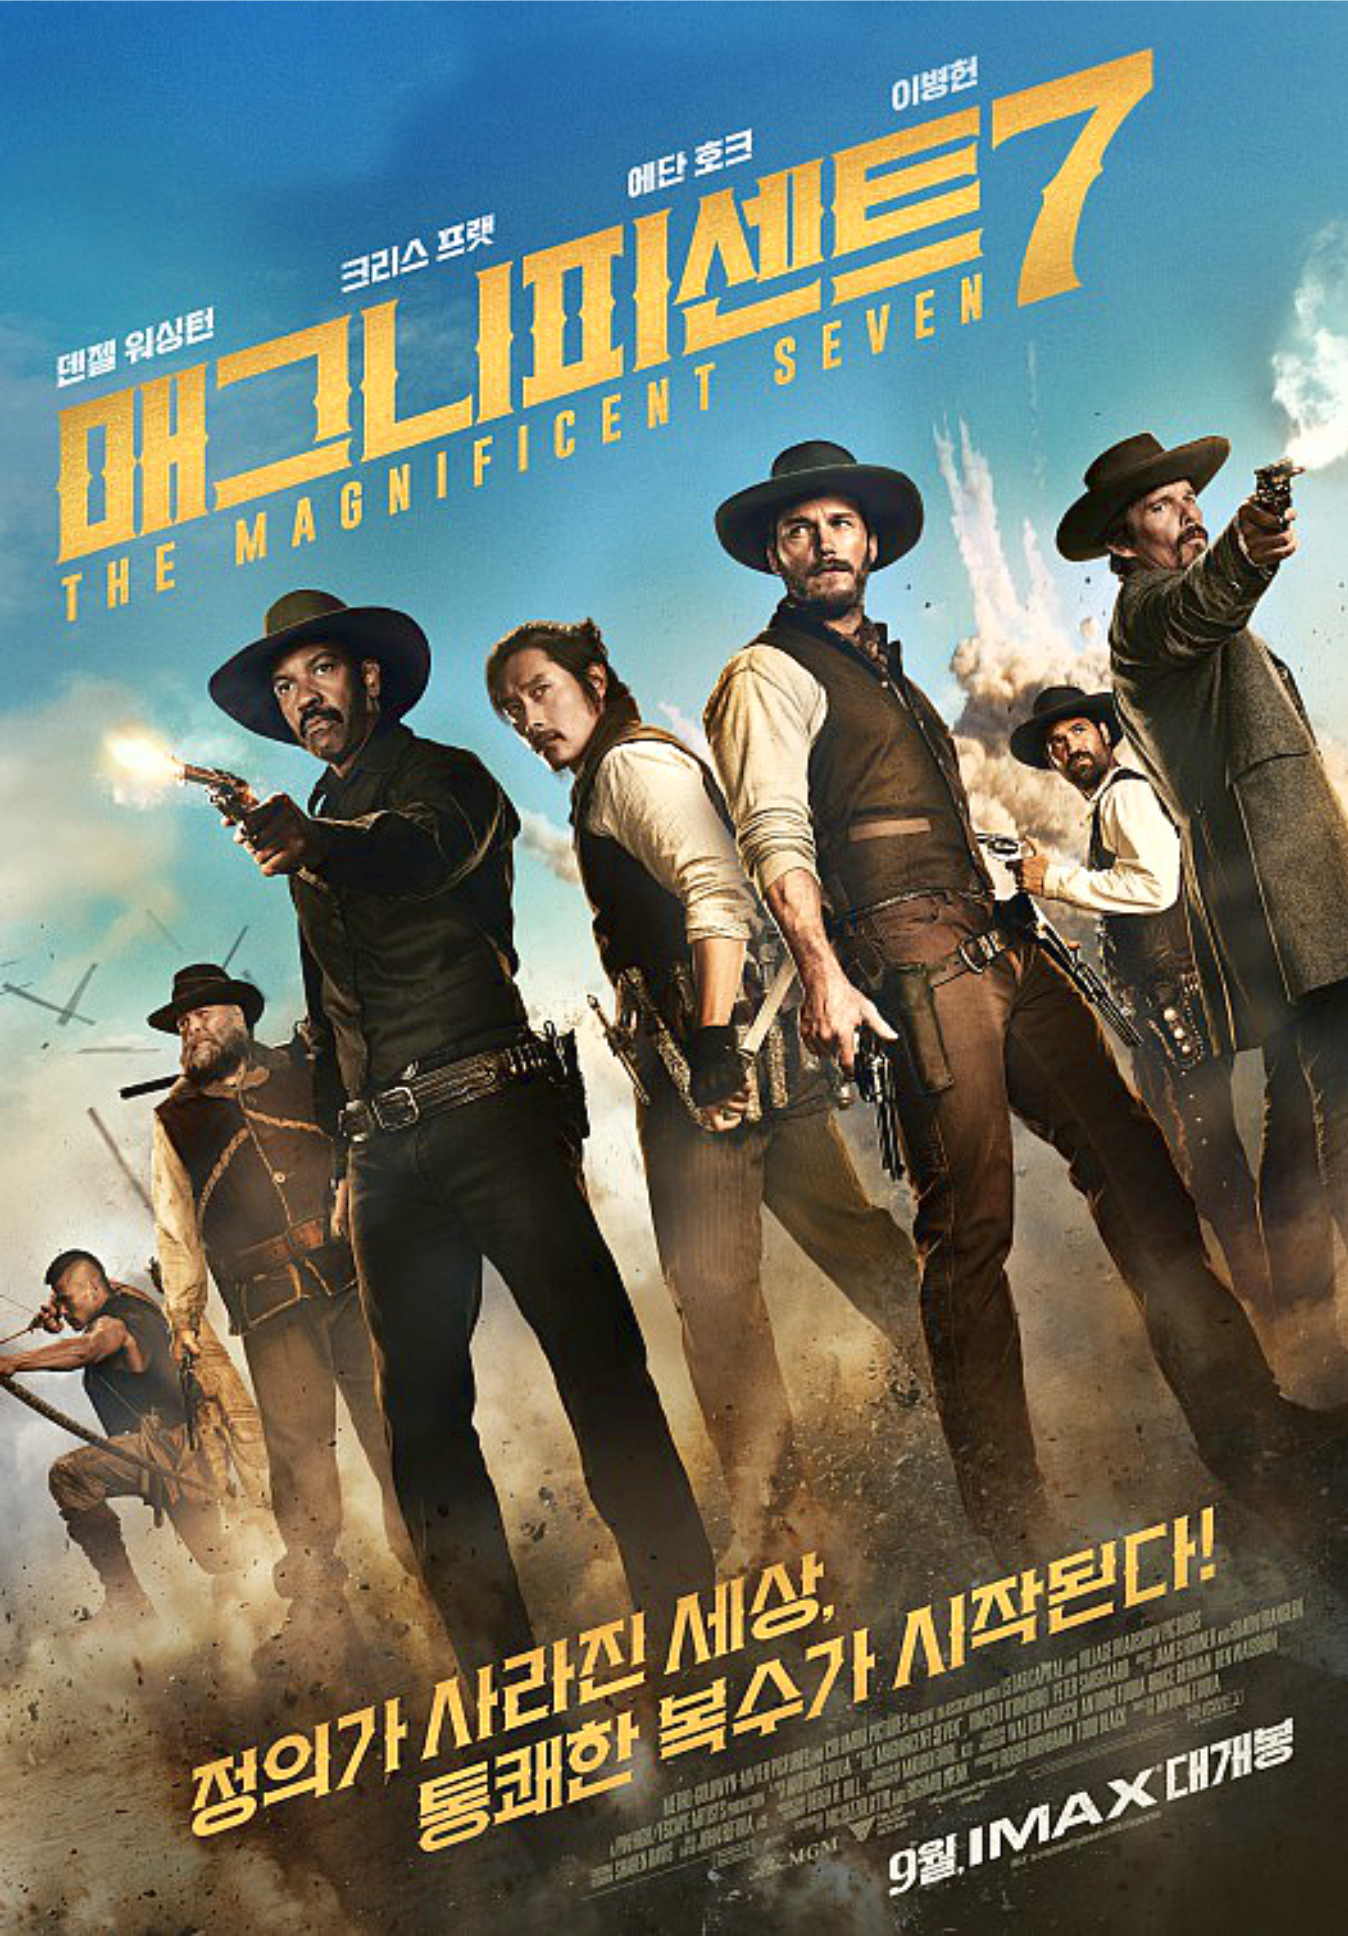 THE MAGNIFICENT 7 2016 - poster 5